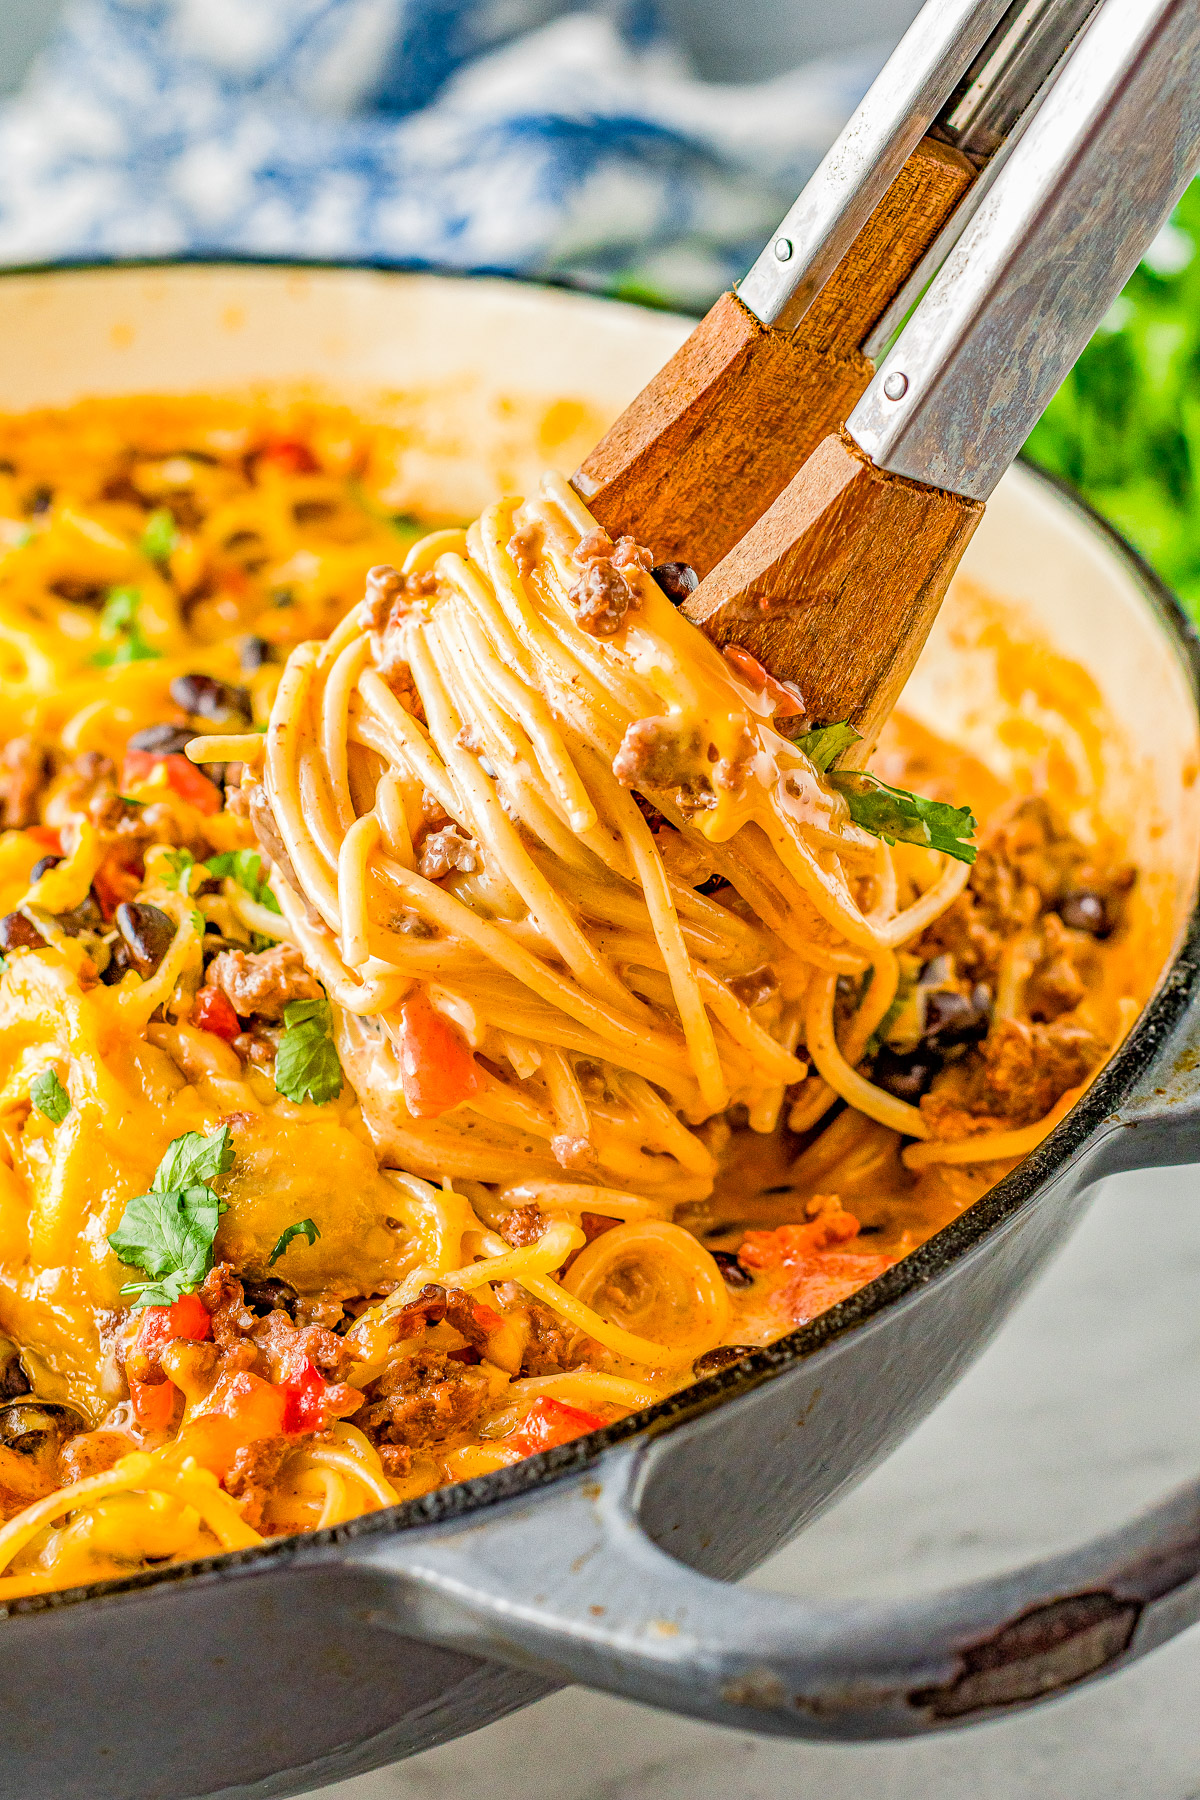 Taco Spaghetti - Tender spaghetti noodles are tossed in a creamy cheese sauce along with seasoned ground beef, tomatoes, green chiles, black beans, and cilantro! The PERFECT family-friendly weeknight dinner recipe that's super EASY and ready in 30 minutes!